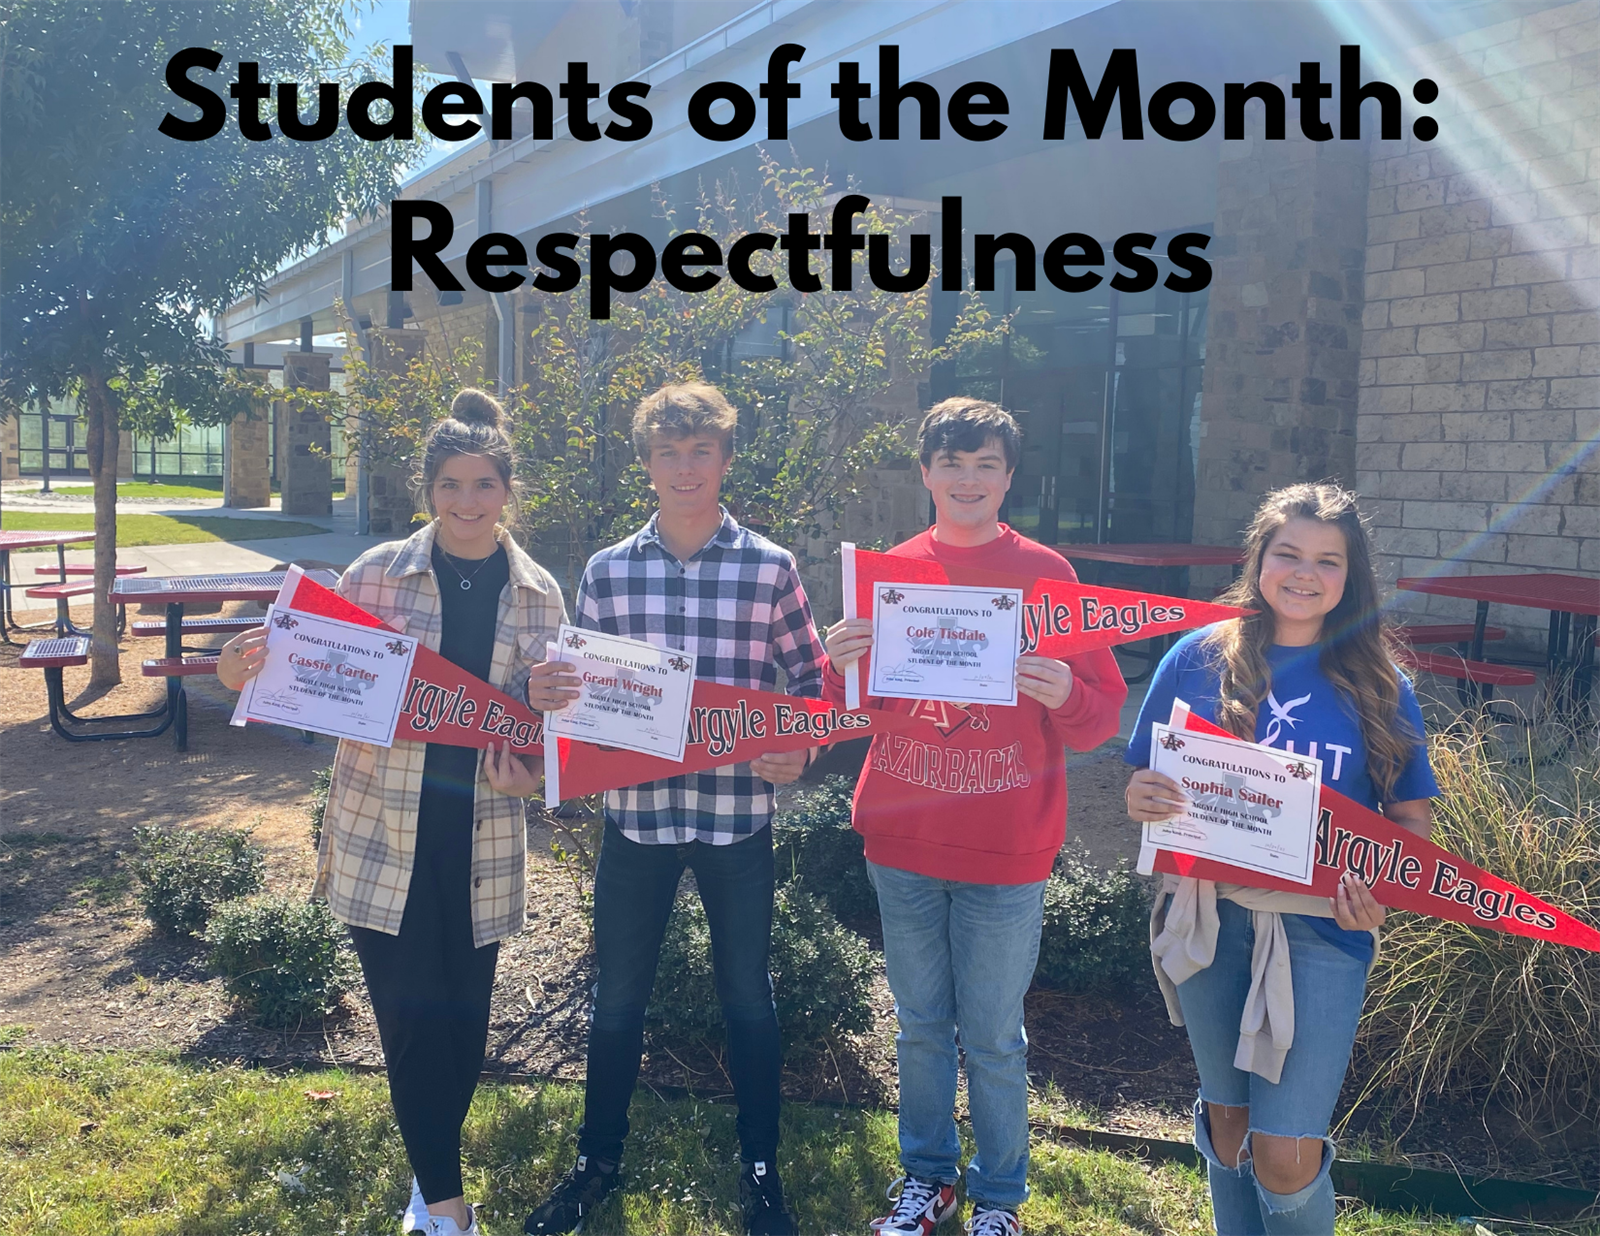  Students of the month image